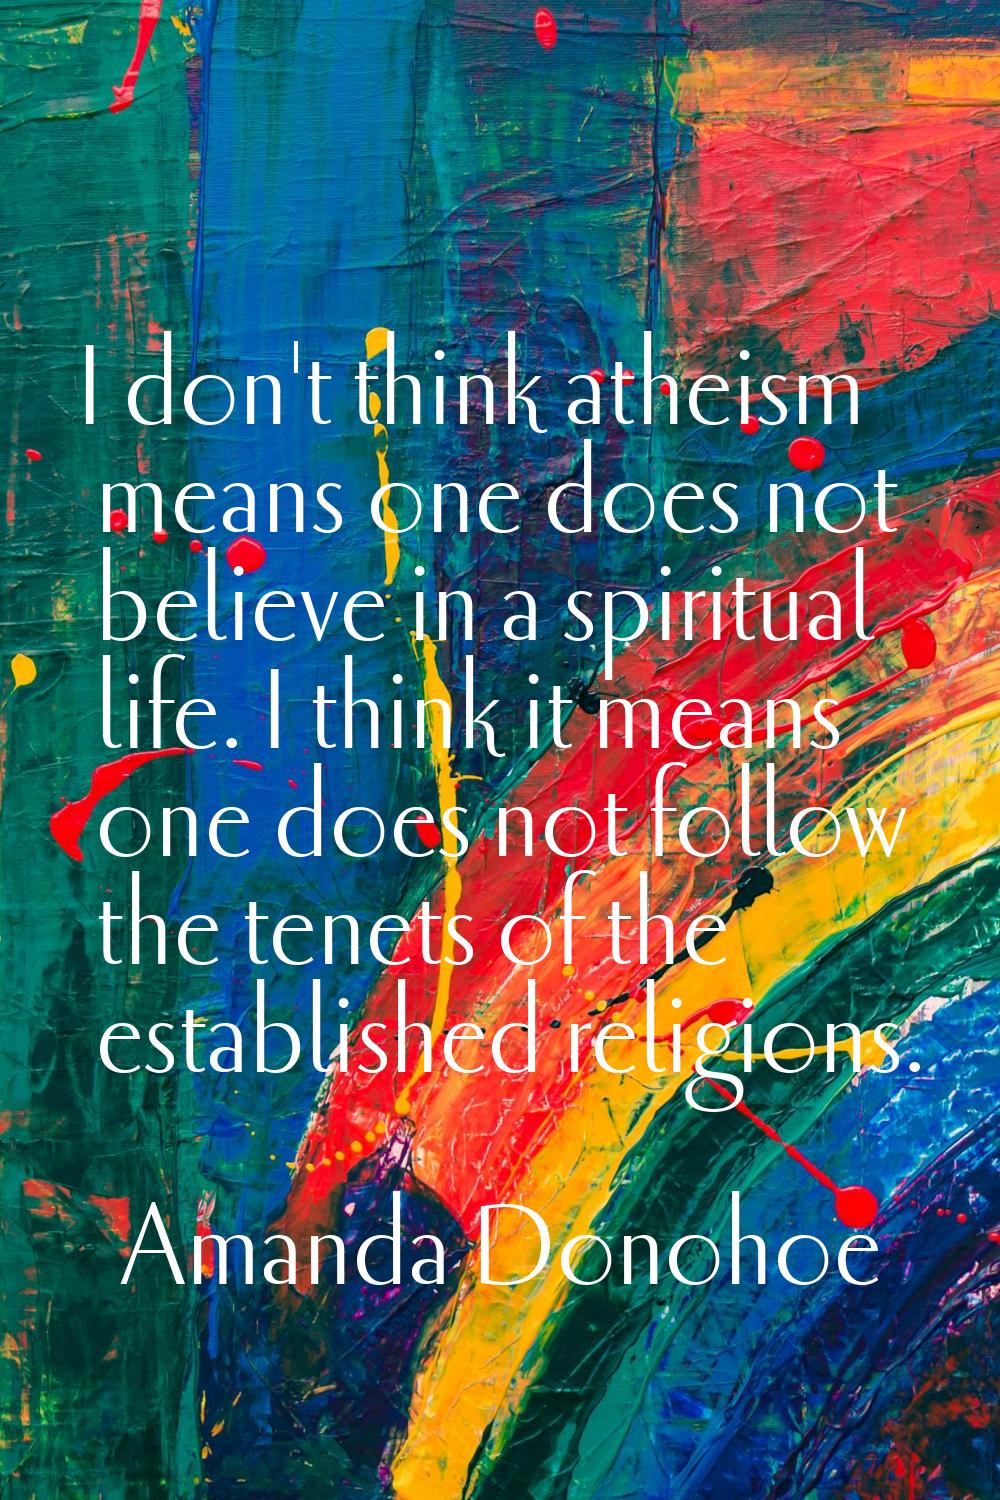 I don't think atheism means one does not believe in a spiritual life. I think it means one does not